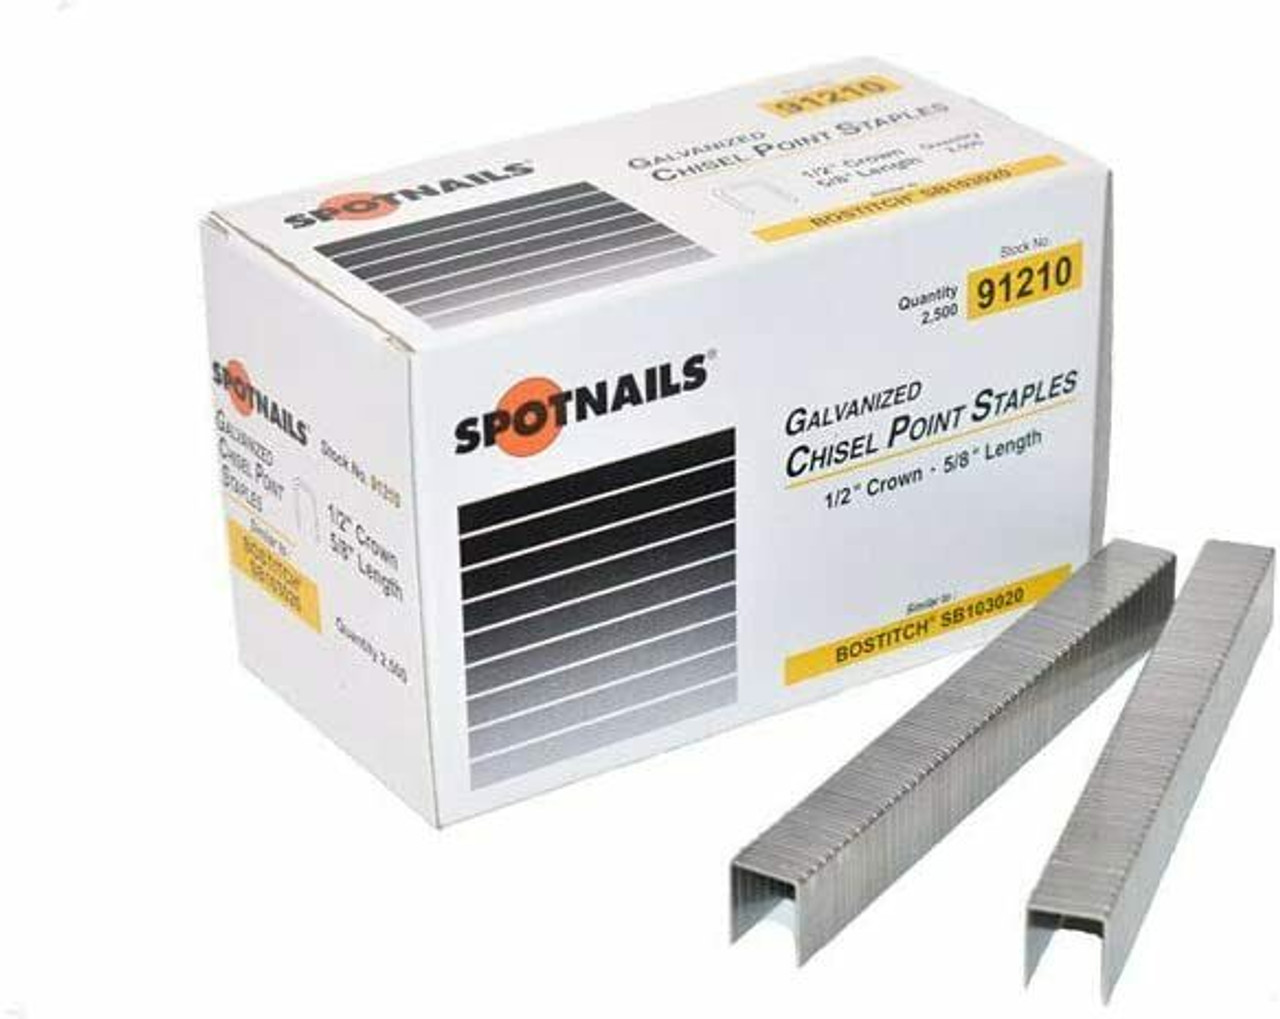 SpotNails 91210 5/8-Inch Galvanized Chisel 1/2-Inch Crown Fine Wire Staples 50M